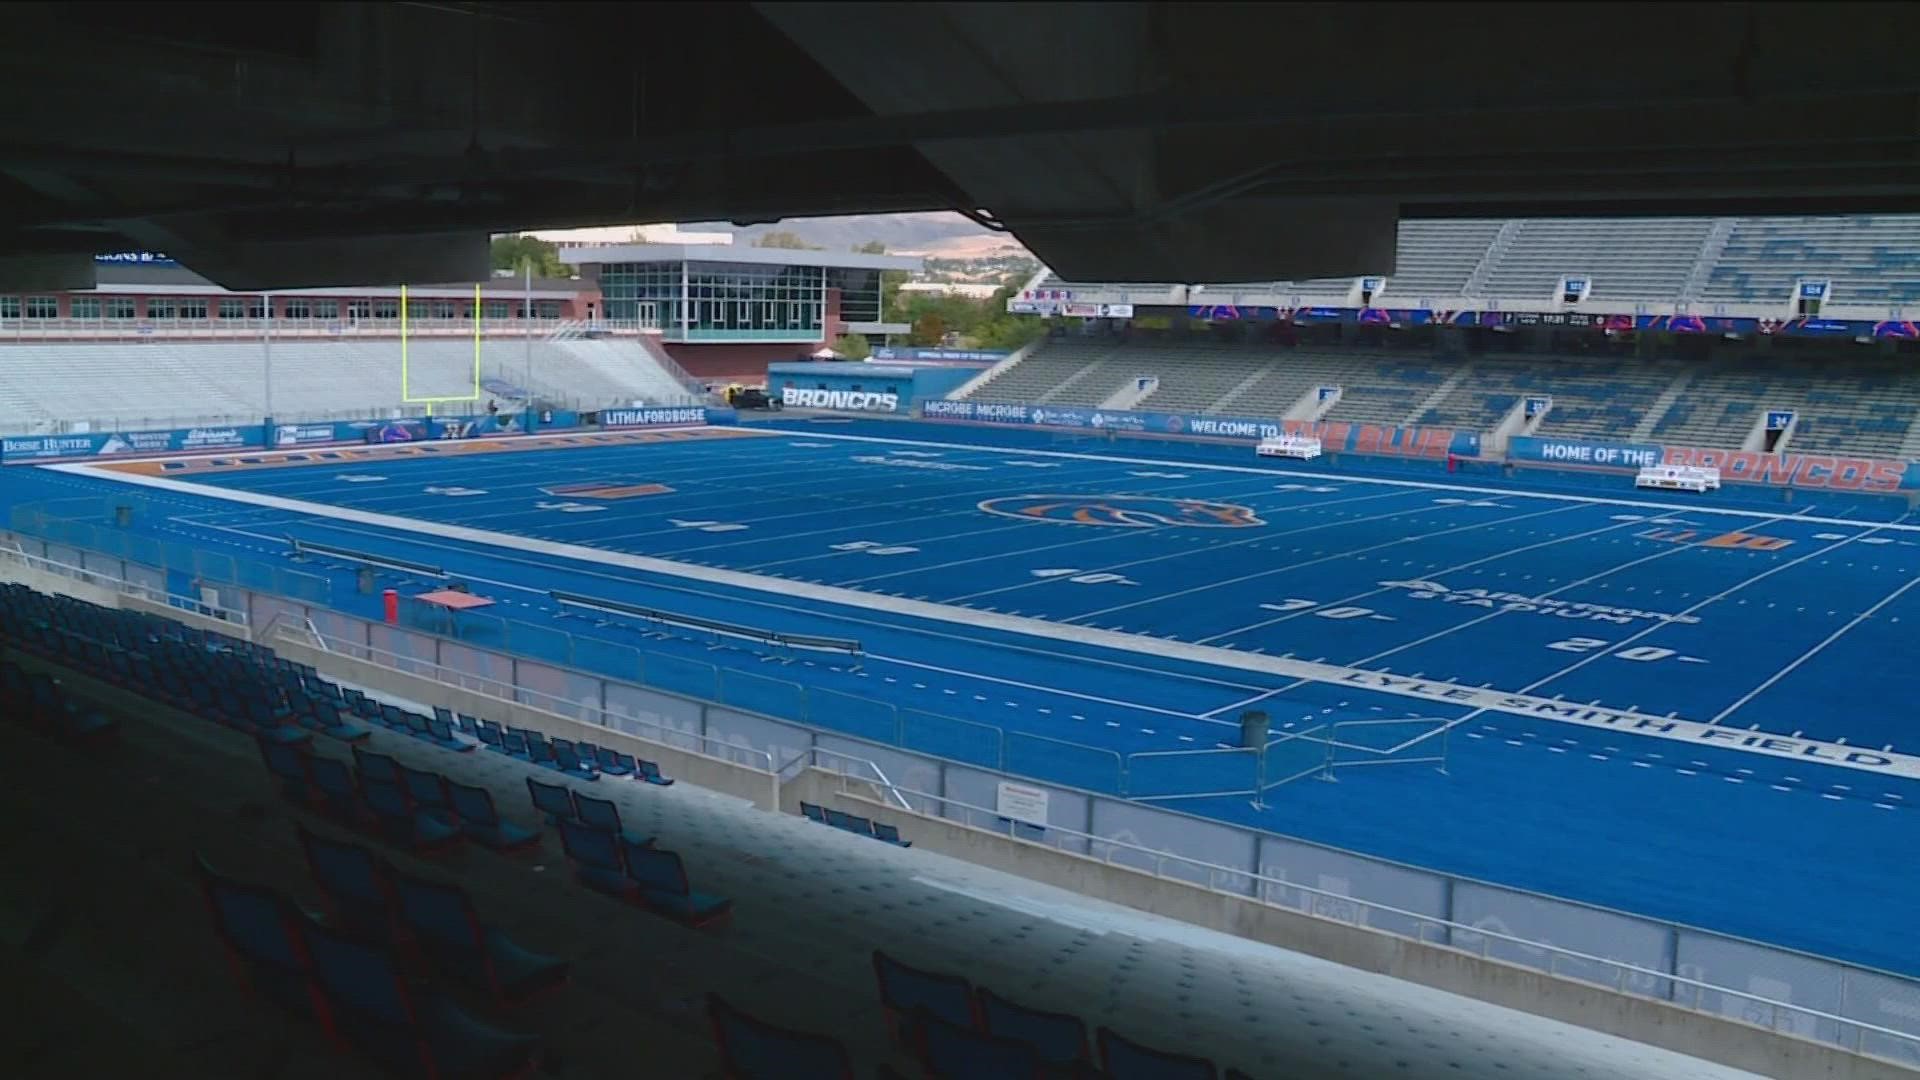 The Boise State Broncos are set to play in the comfortable confines of Albertsons Stadium Saturday against the University of Tennessee-Martin Skyhawks.